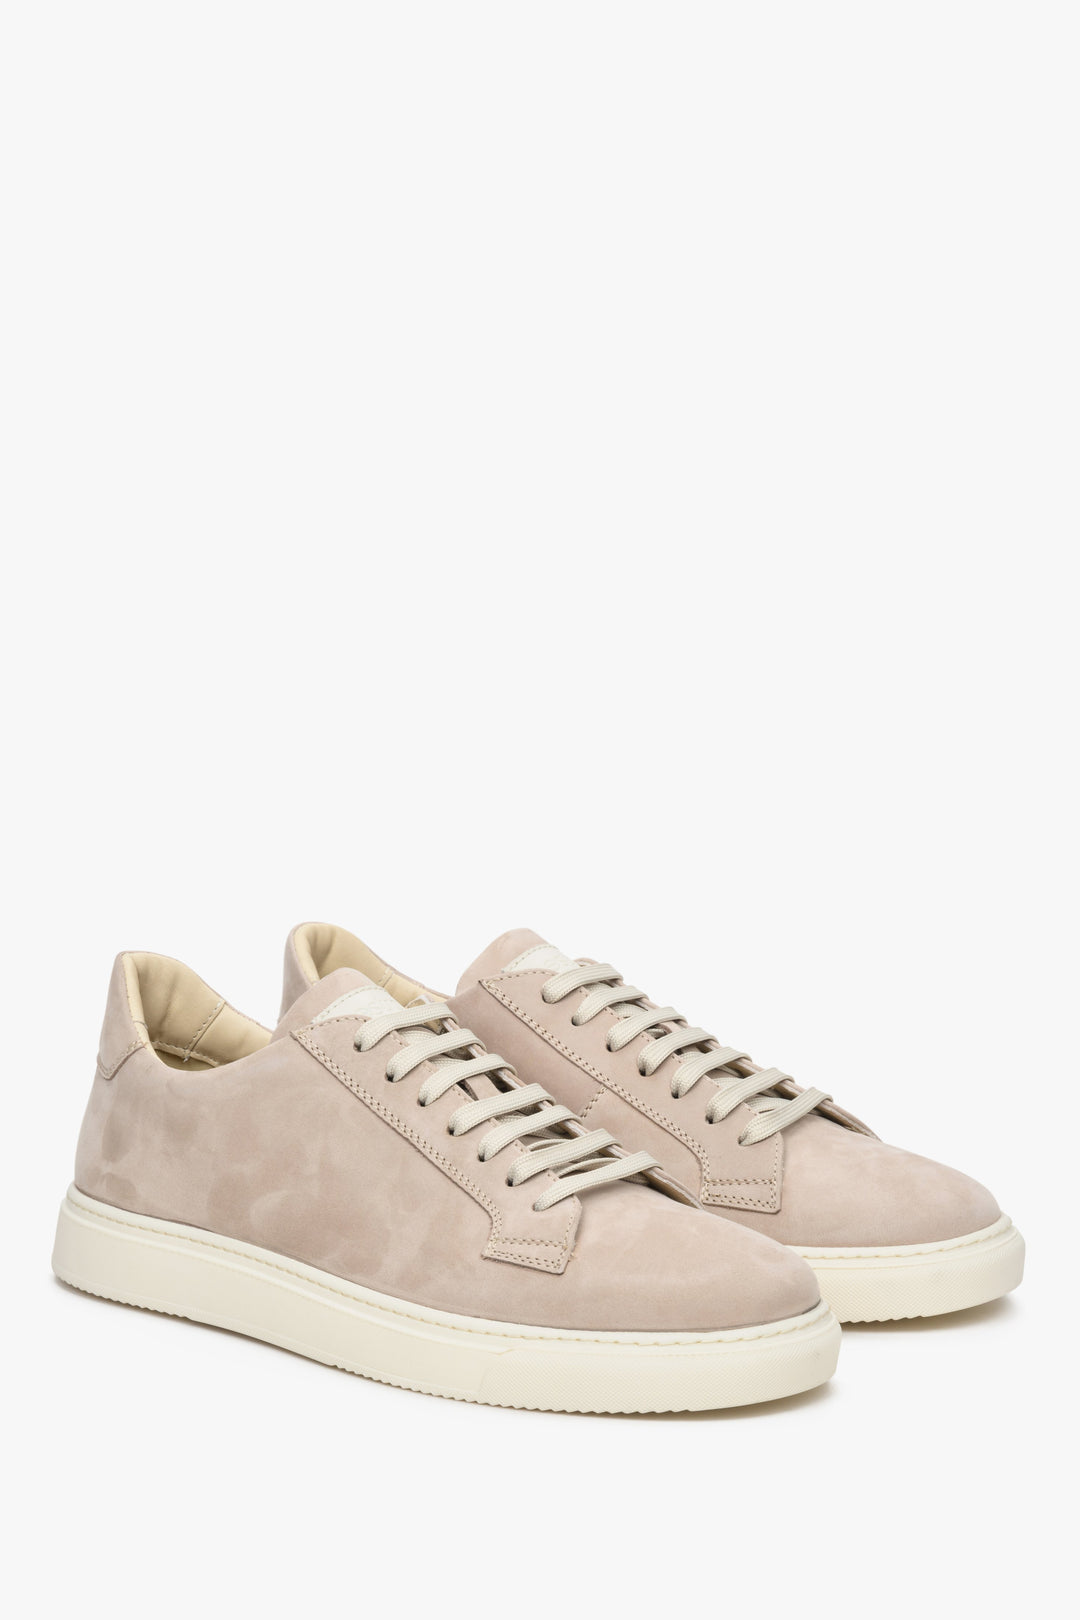 Men's Estro nubuck sneakers in beige - presentation of the top of the shoe and the side seam.